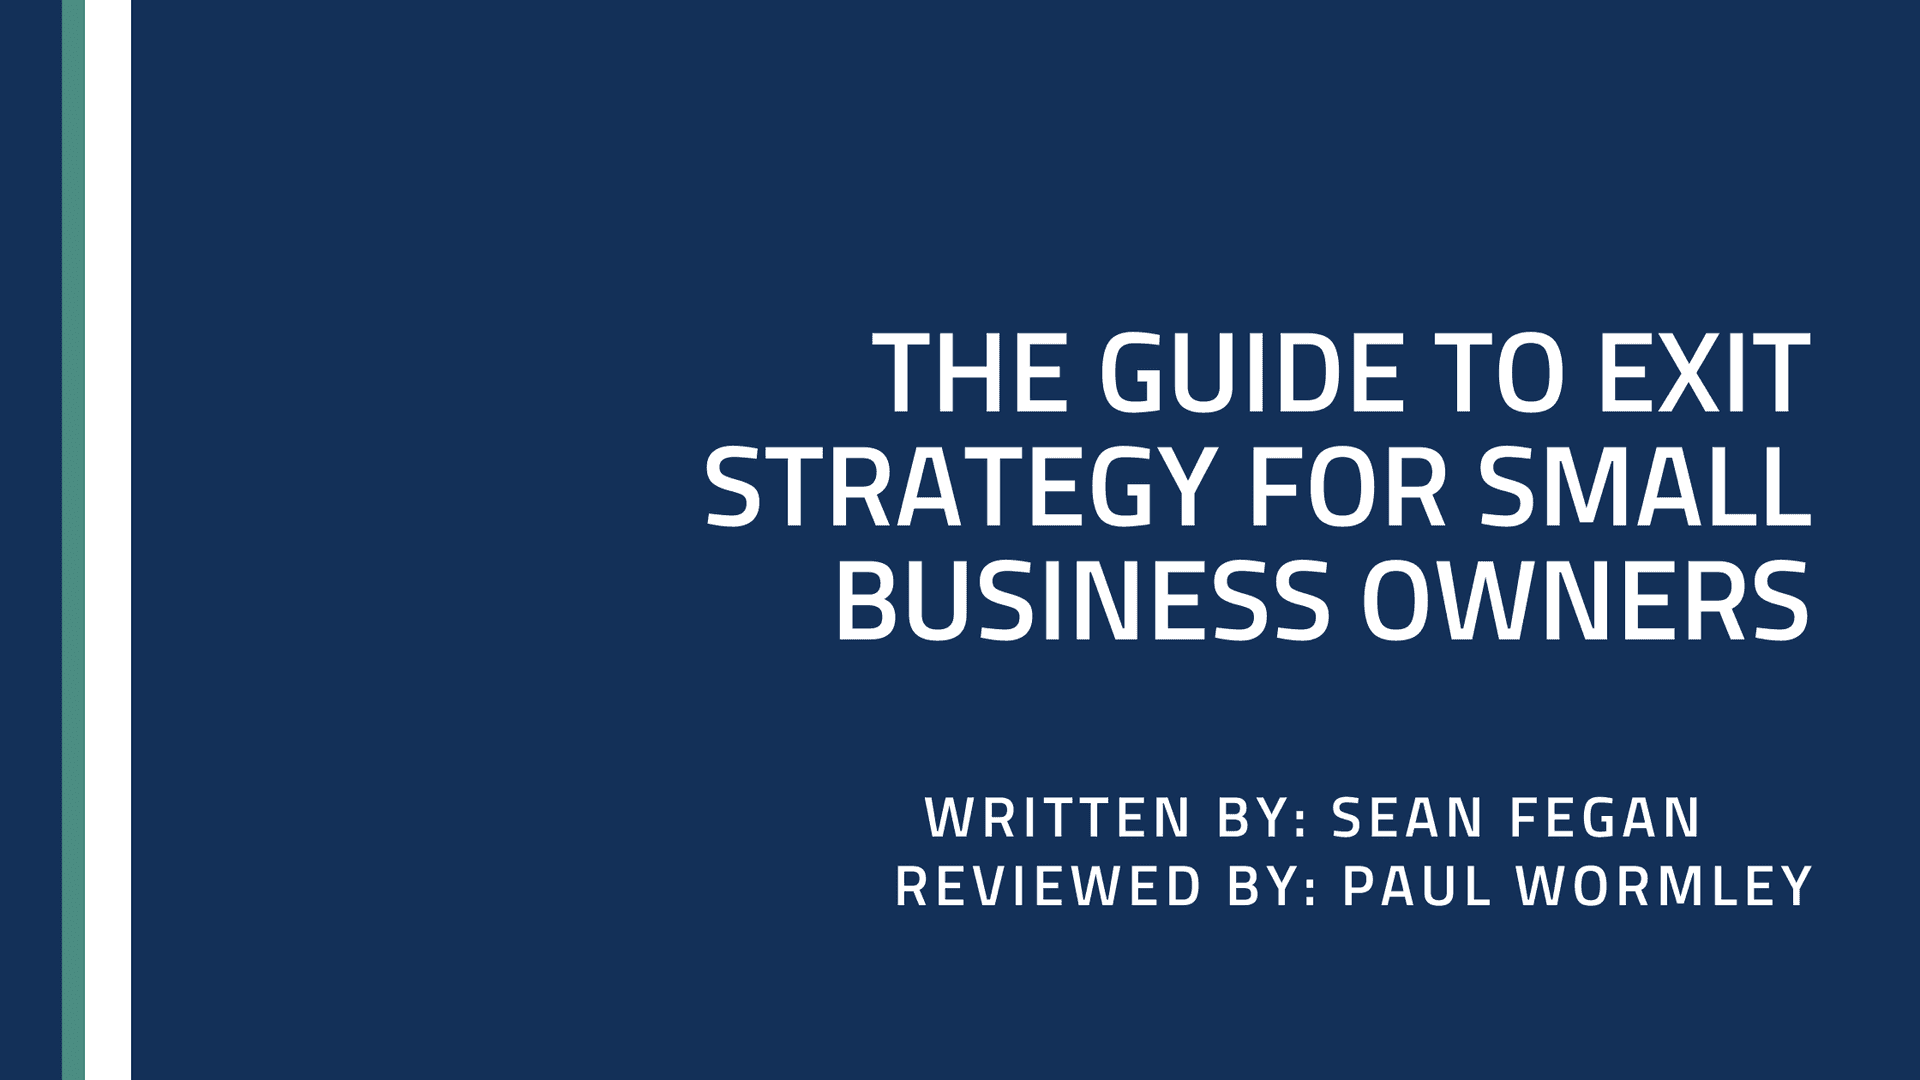 The Guide to Exit Strategy for Small Business Owners